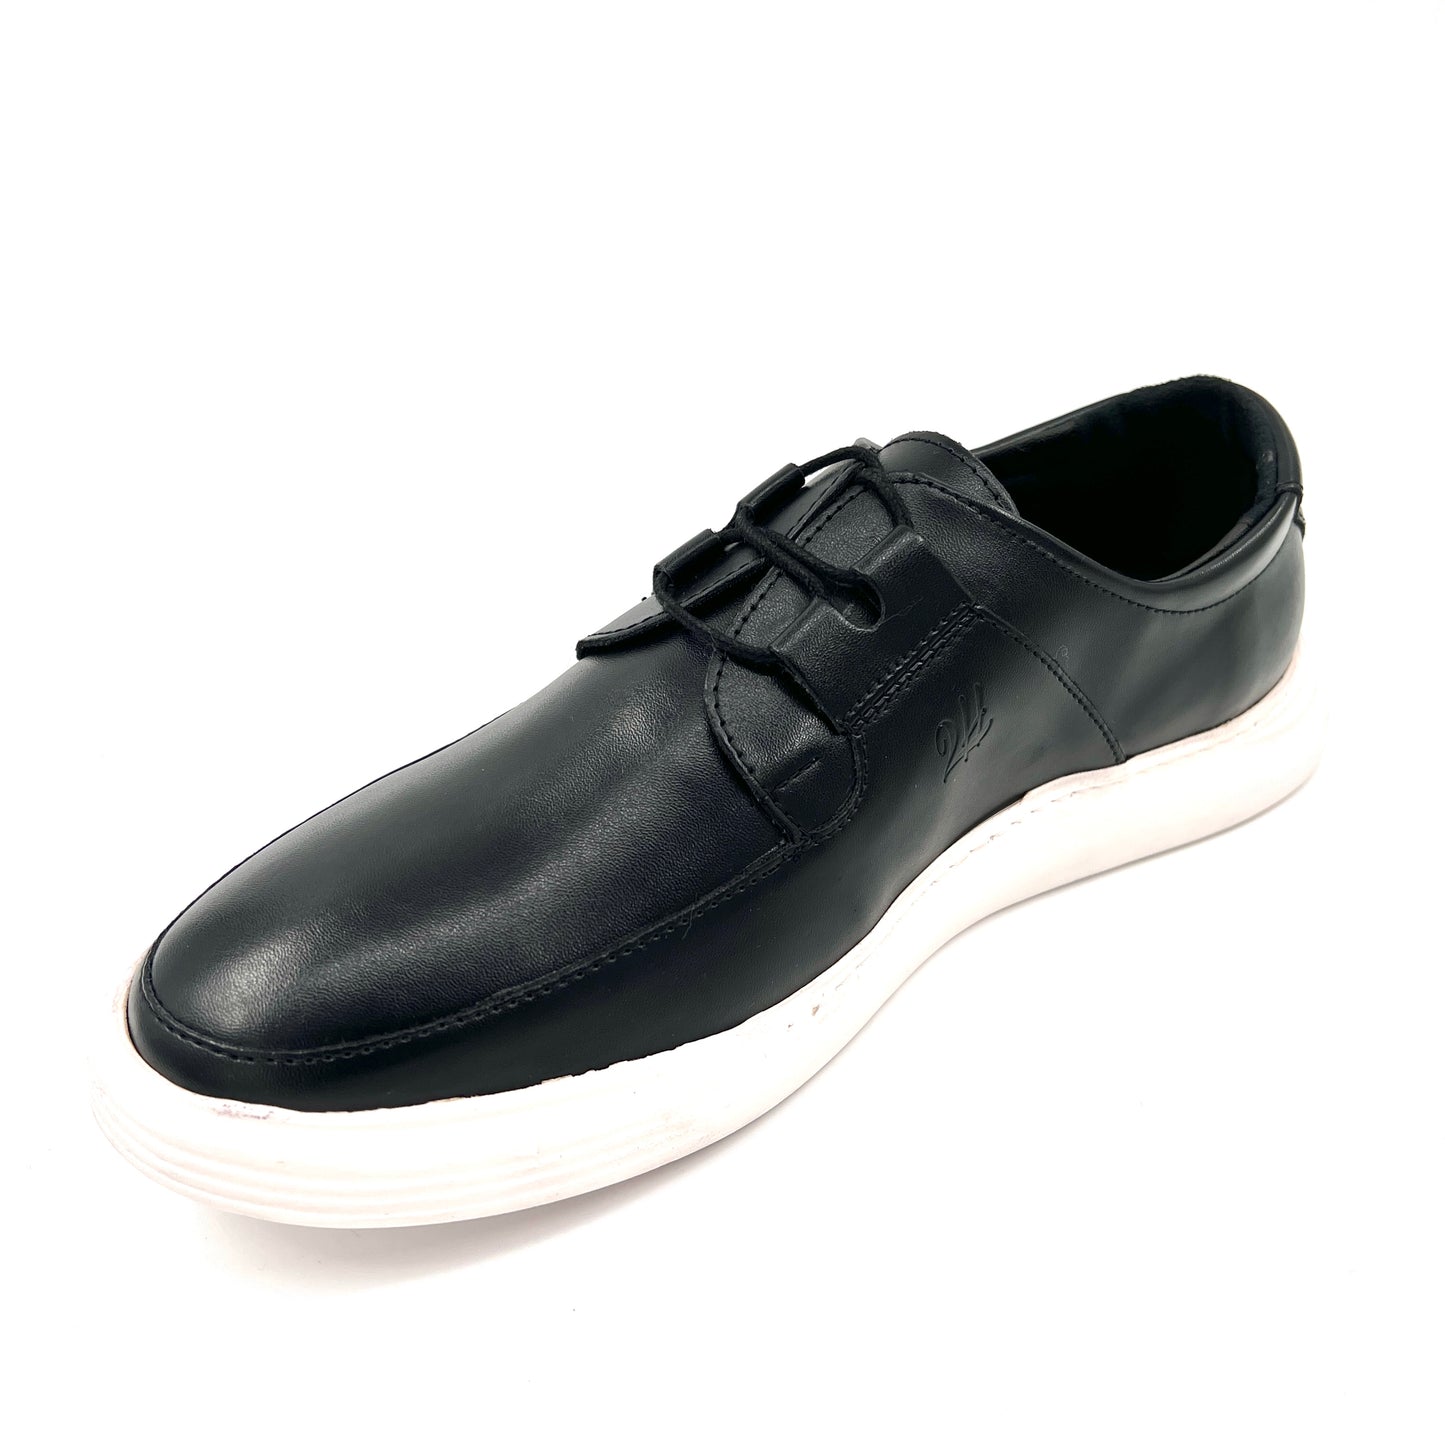 2H 3104 Black/White Sole Casual Shoes